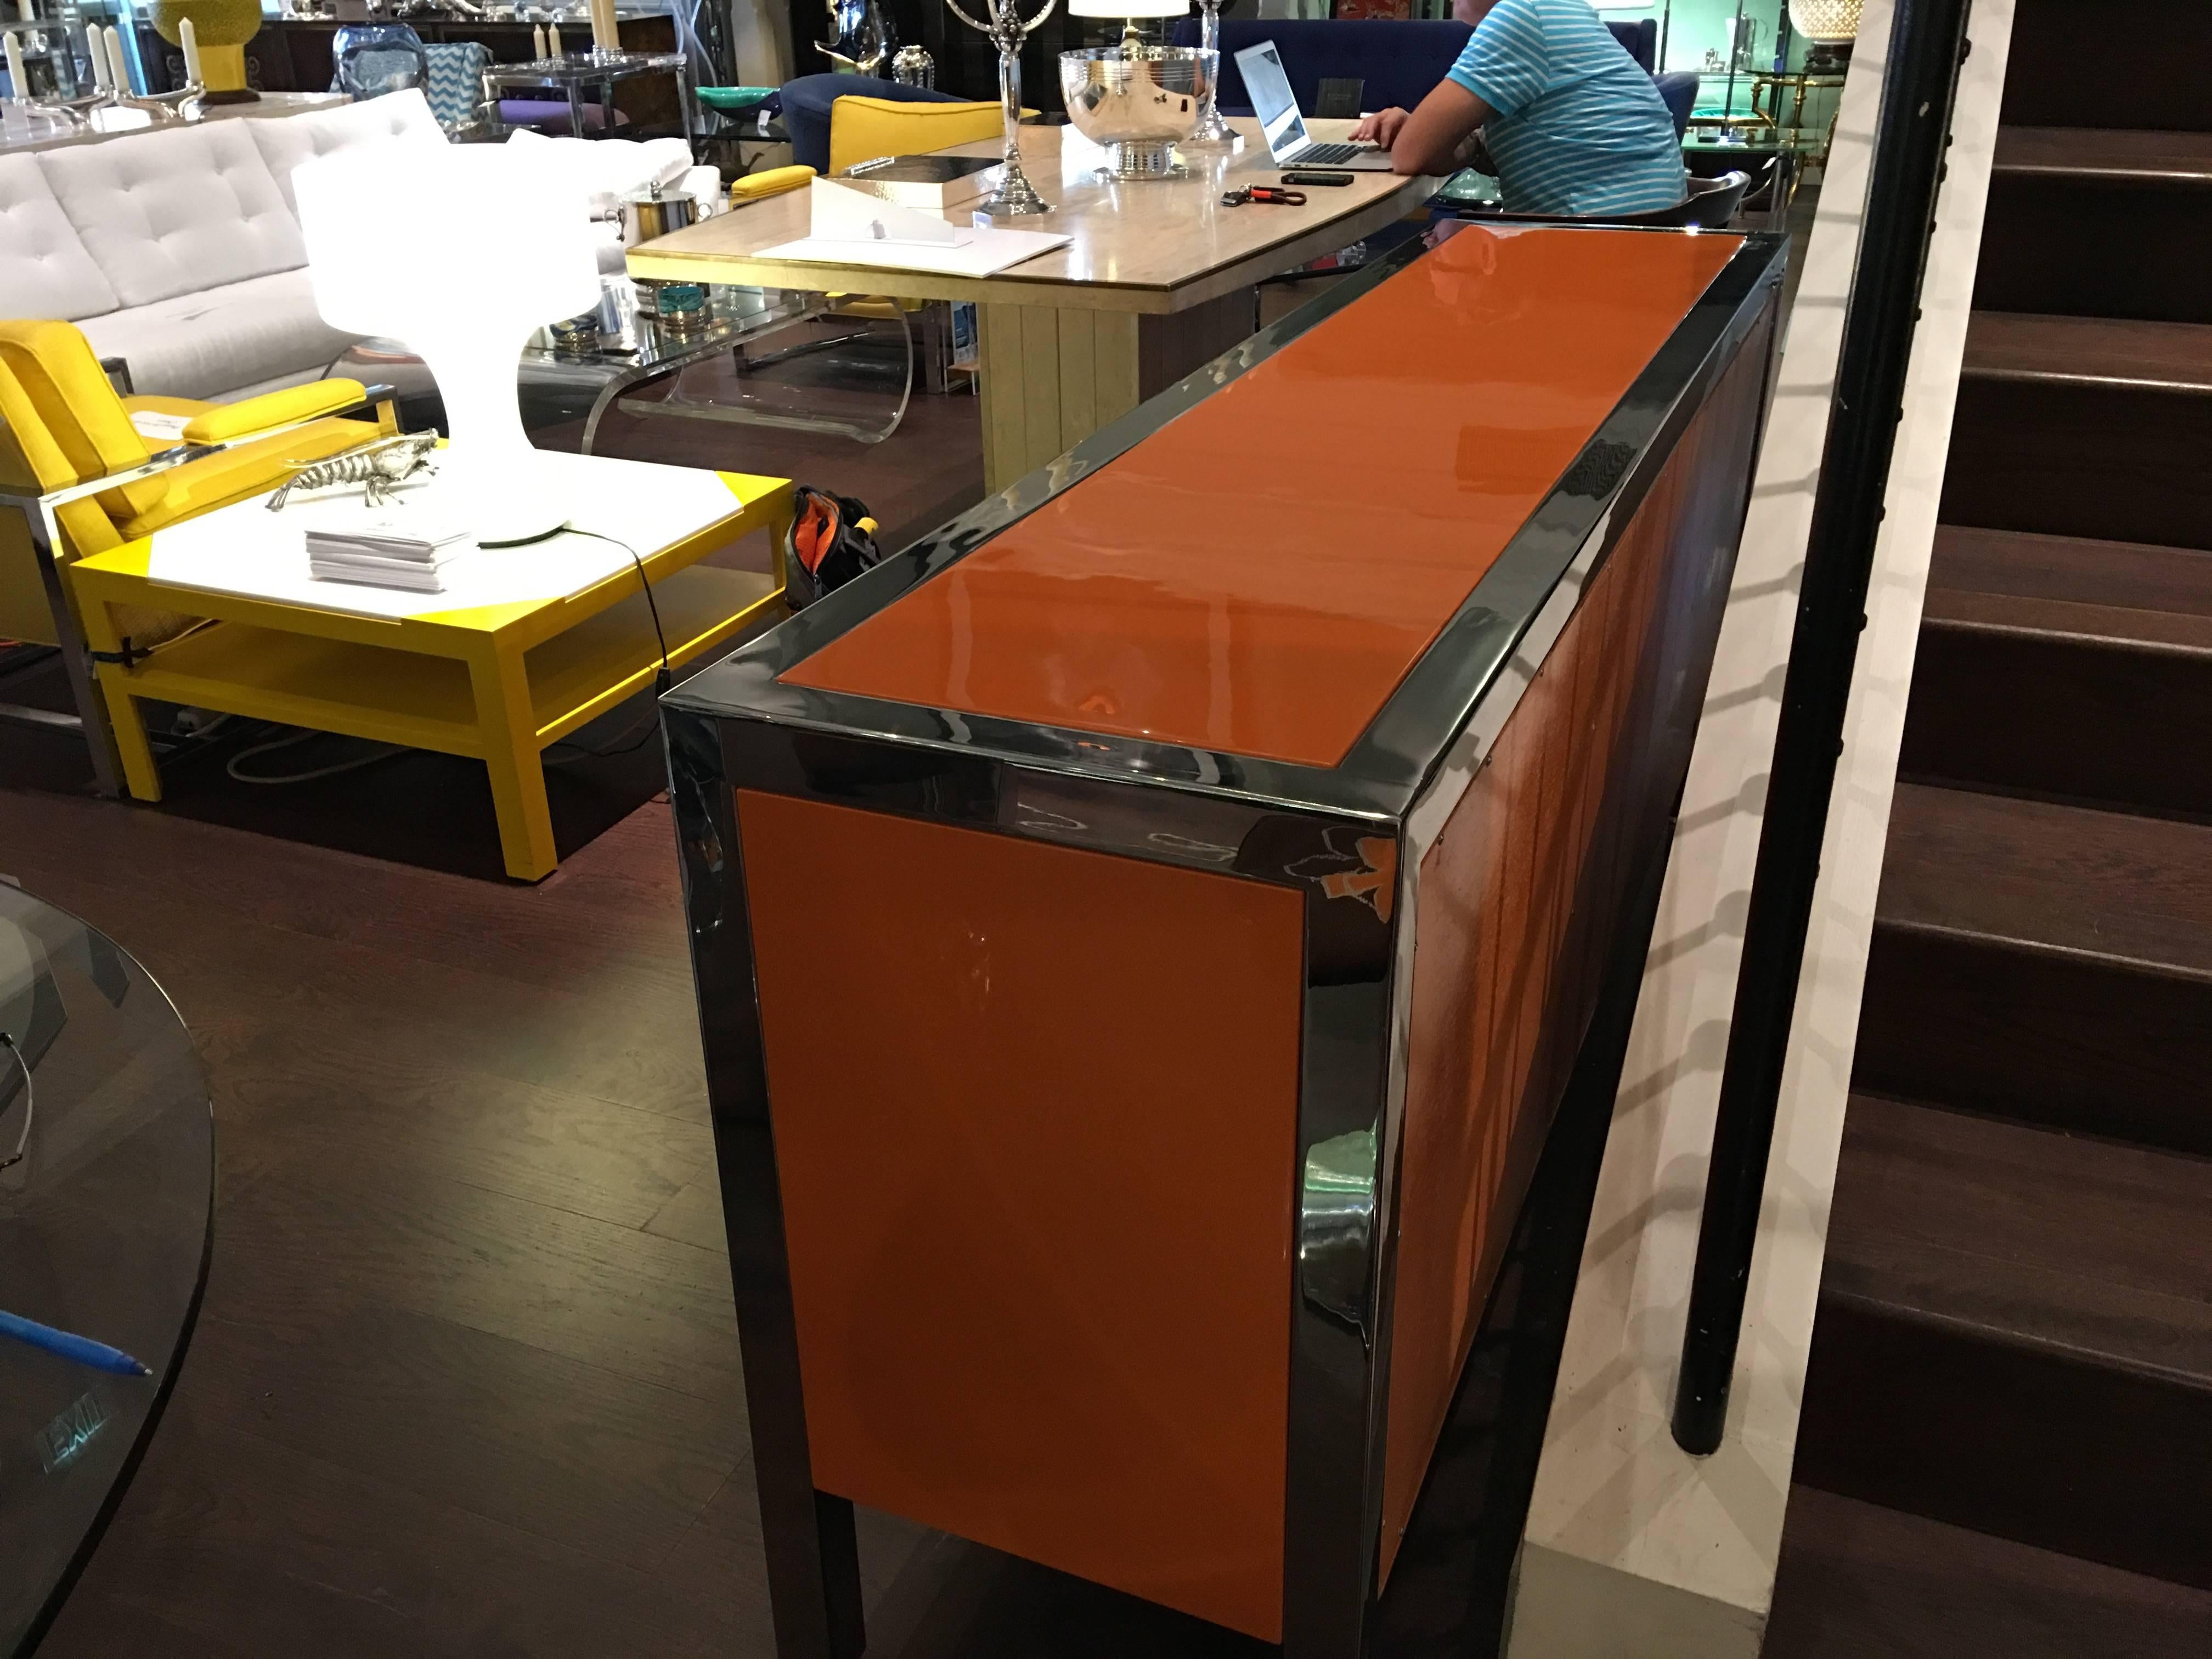 American Pace Orange Lacquer Finish and Polished Steel Cabinet